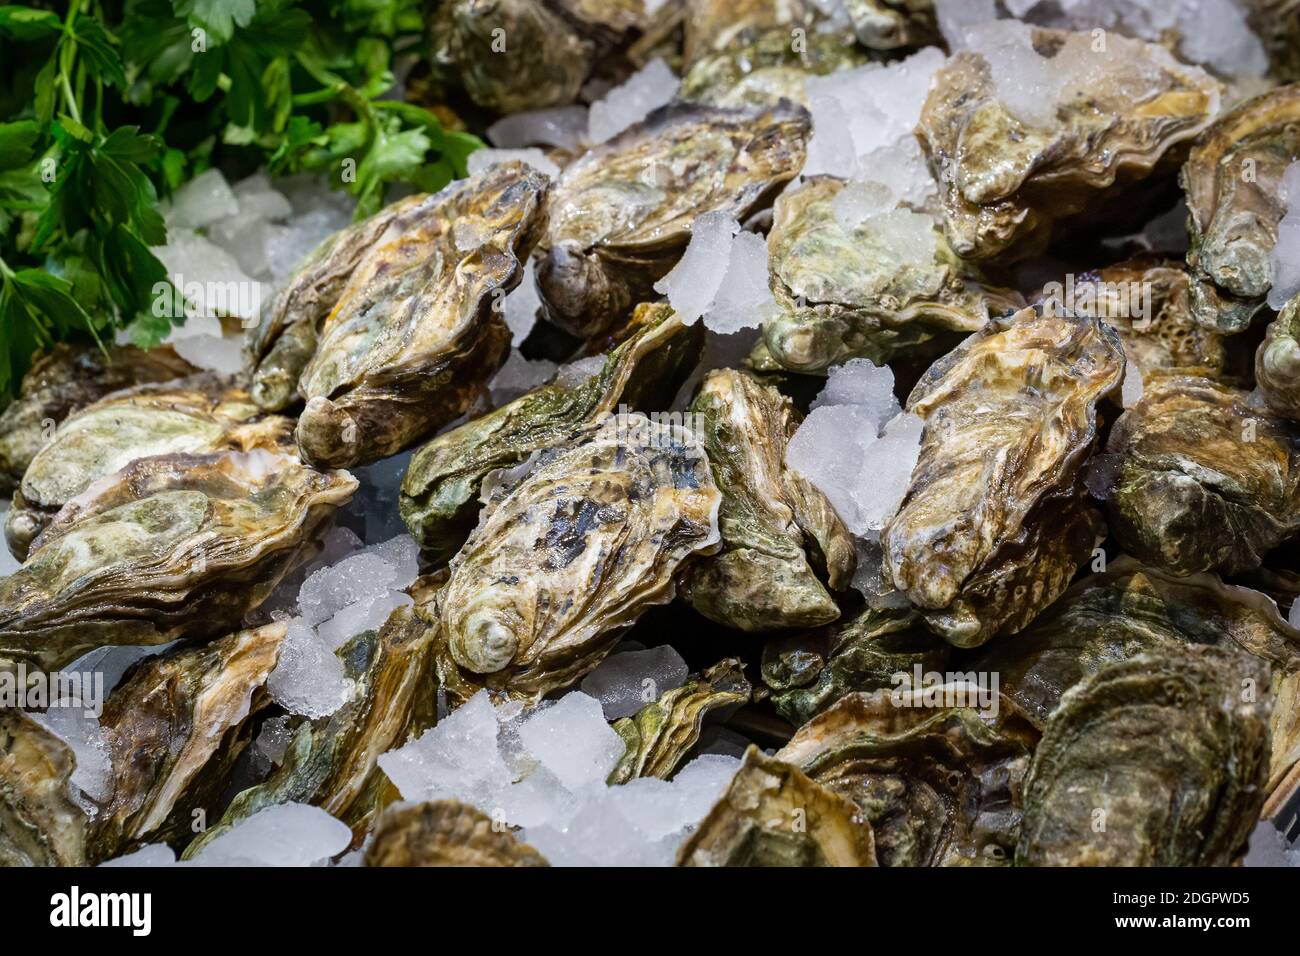 Fresh, raw, Pacific oysters, crassostrea gigas, on a bed of ice in a UK food market Stock Photo